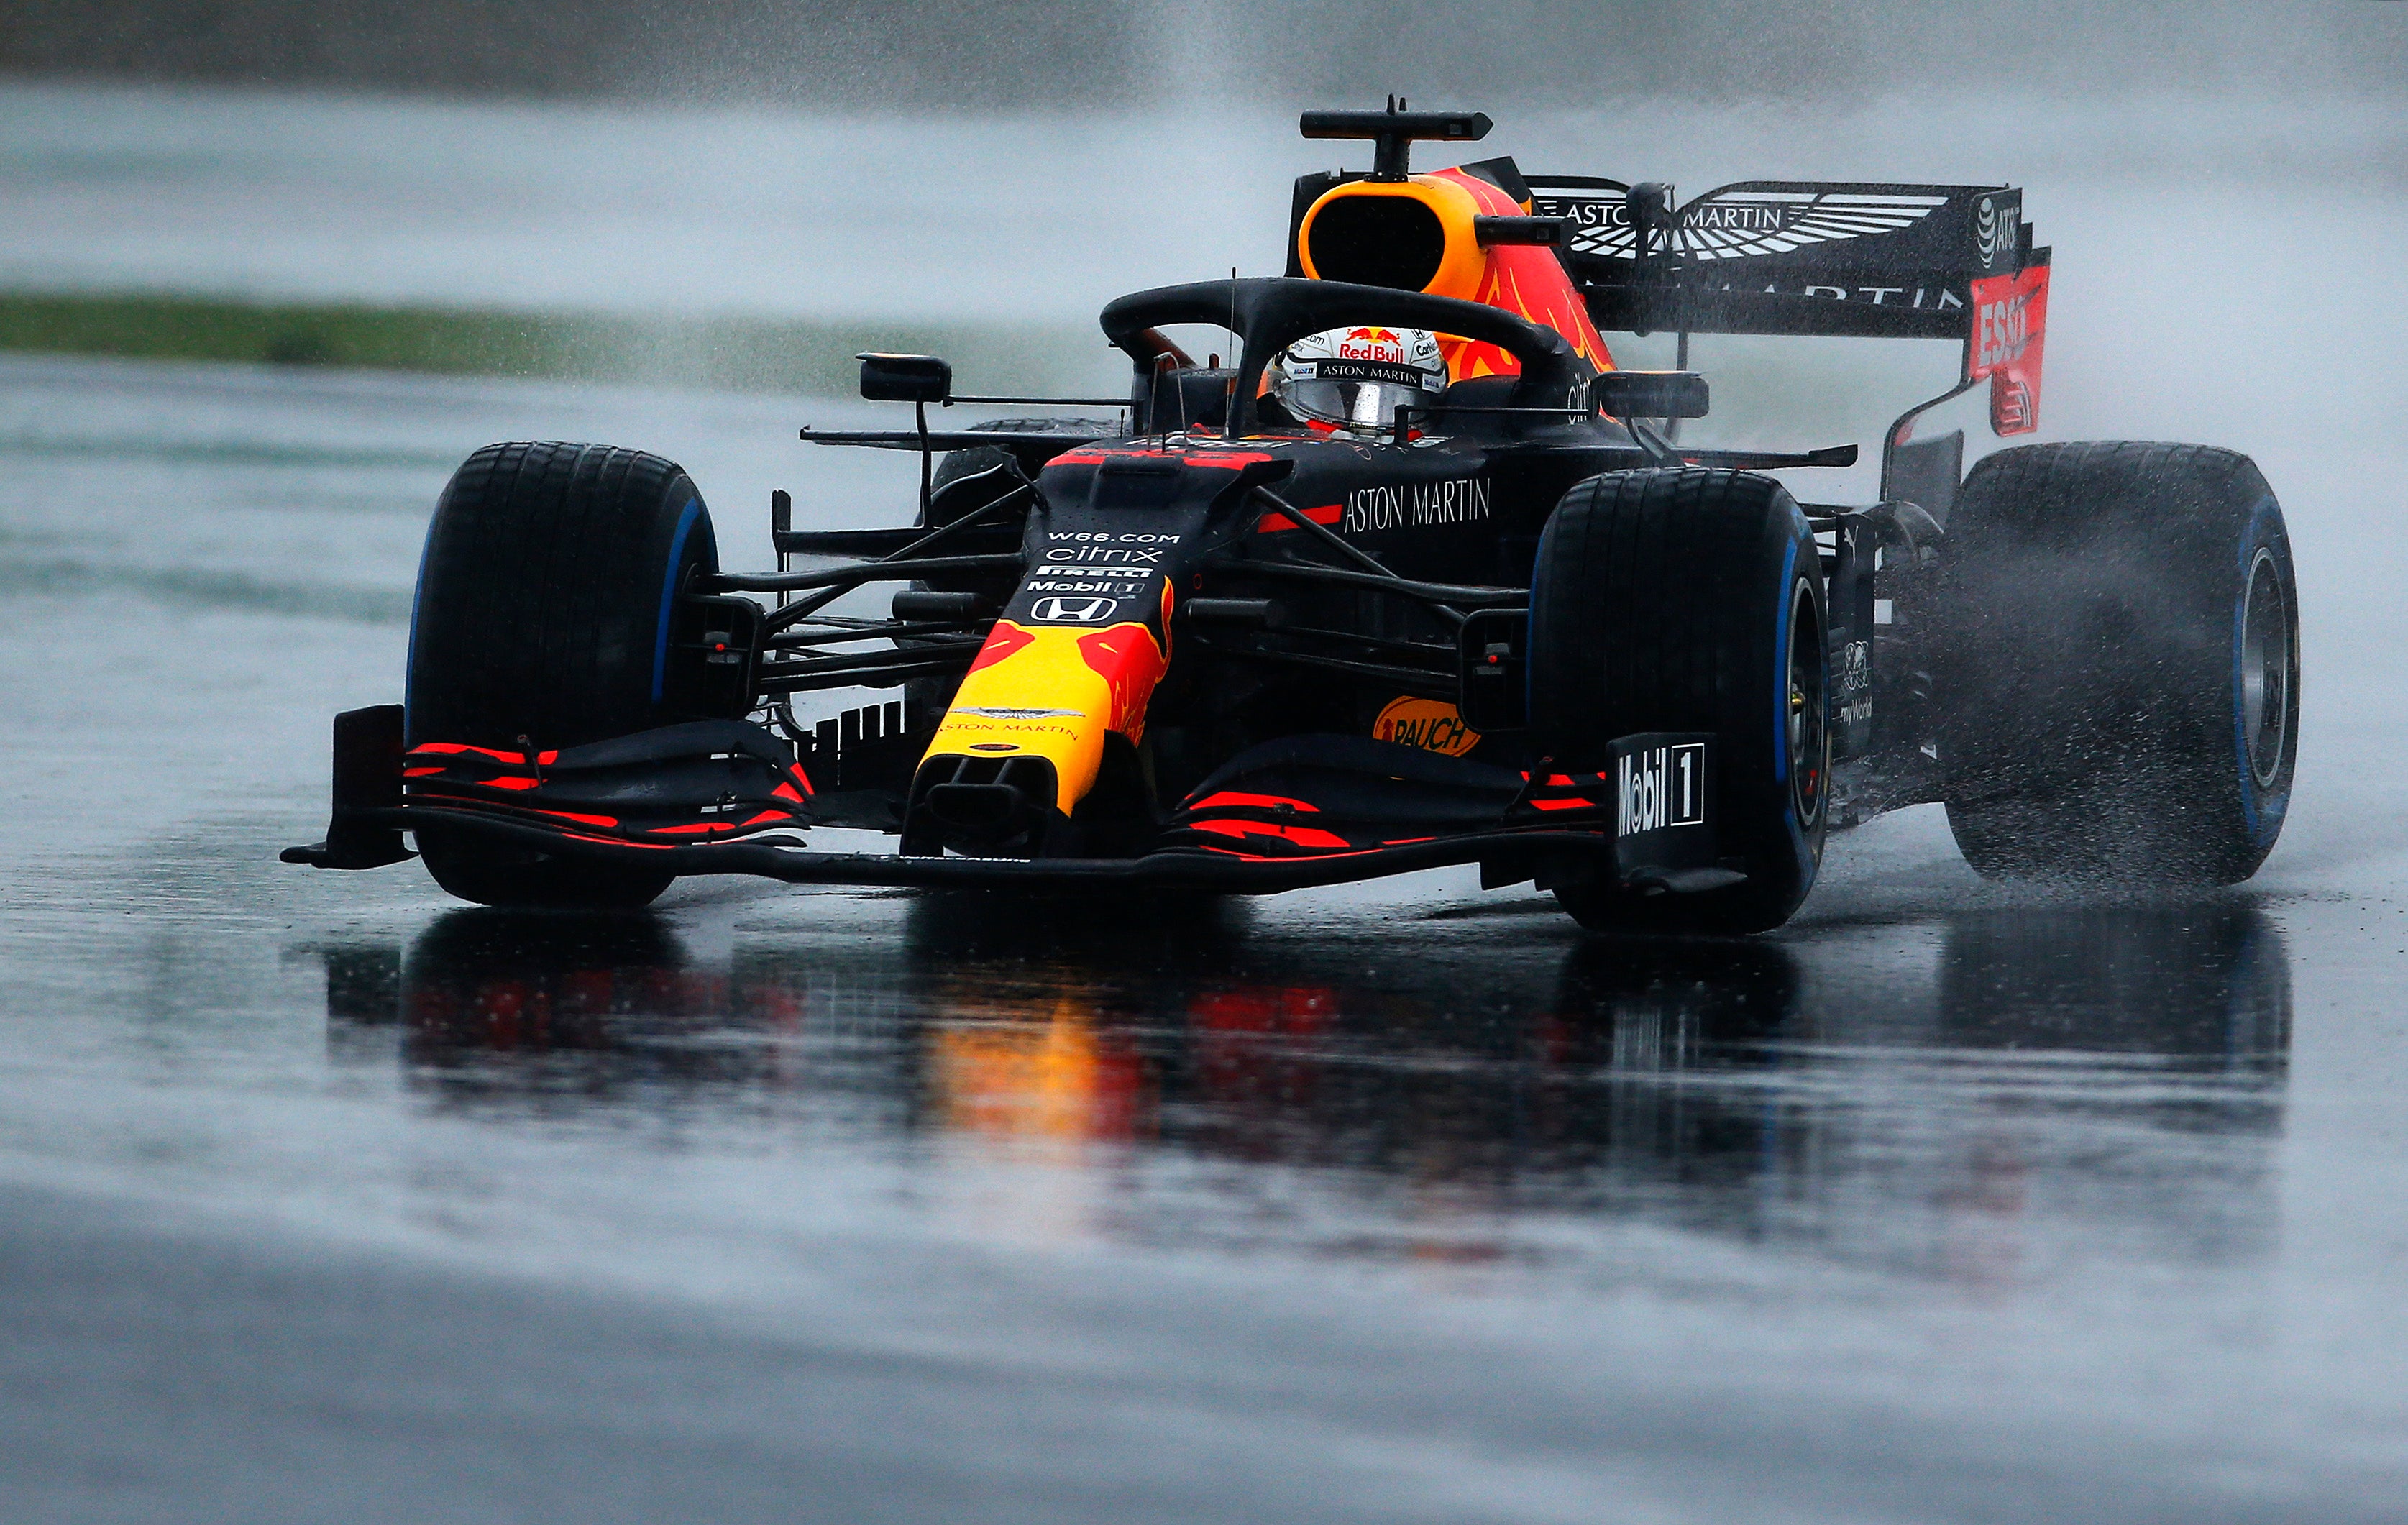 Max Verstappen split the two Racing Points in second place